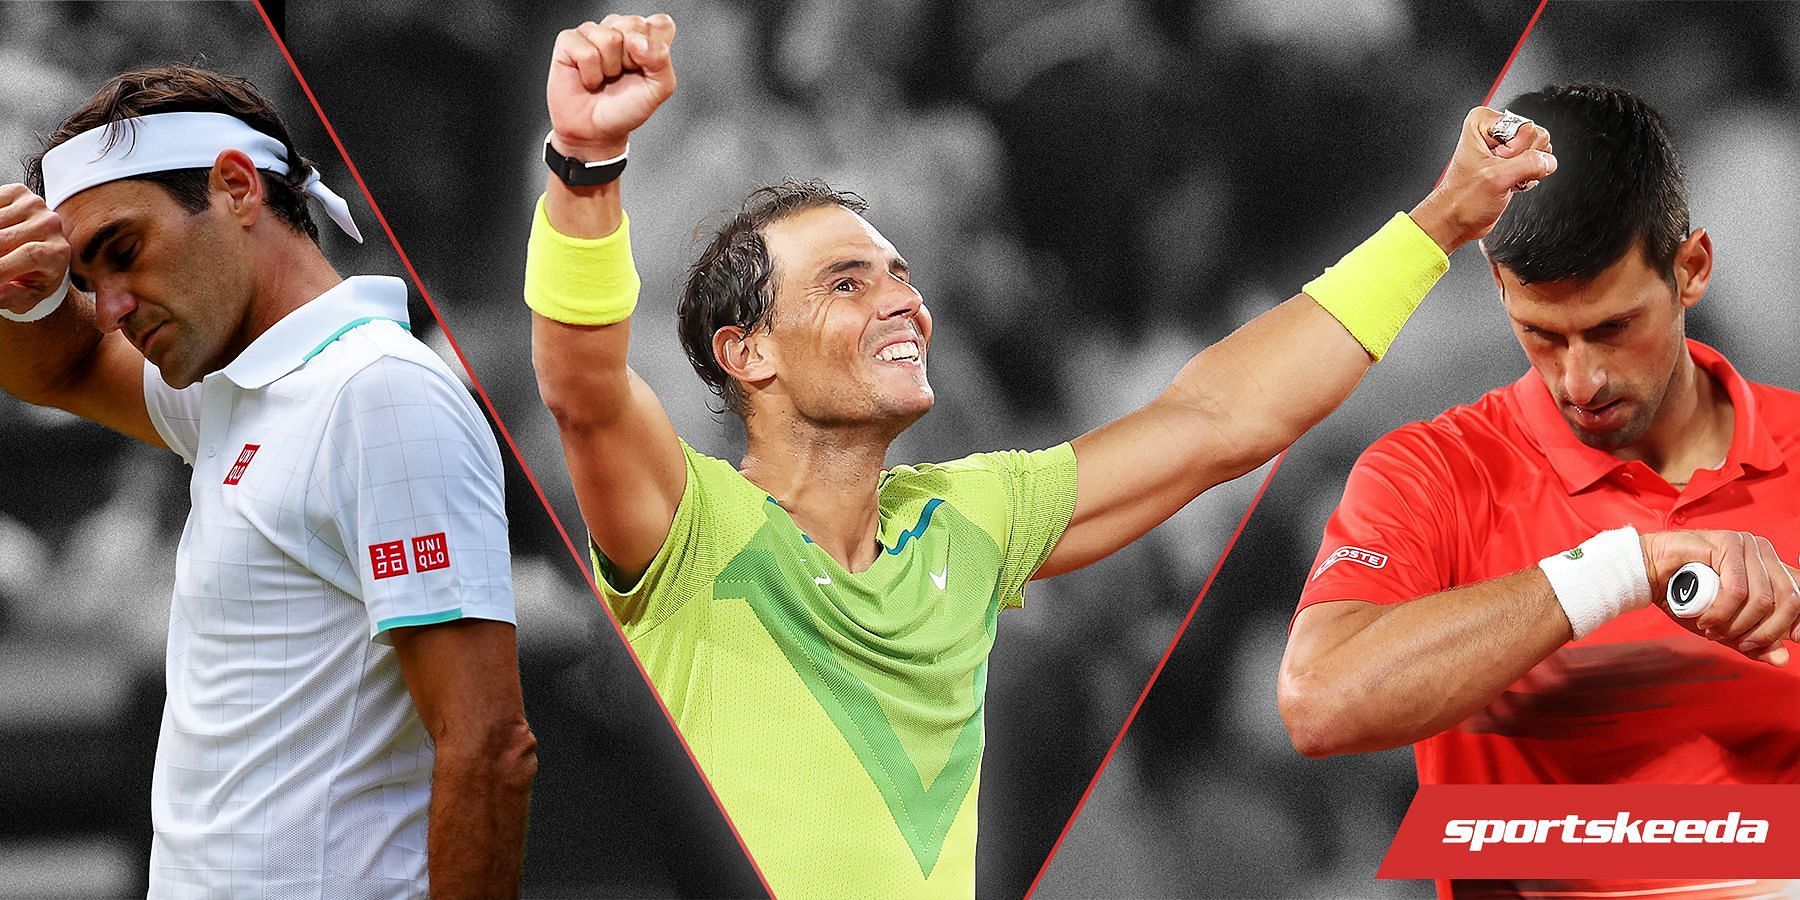 Roger Federer, Rafael Nadal, and Novak Djokovic have a combined tally of 61 Grand Slam titles.